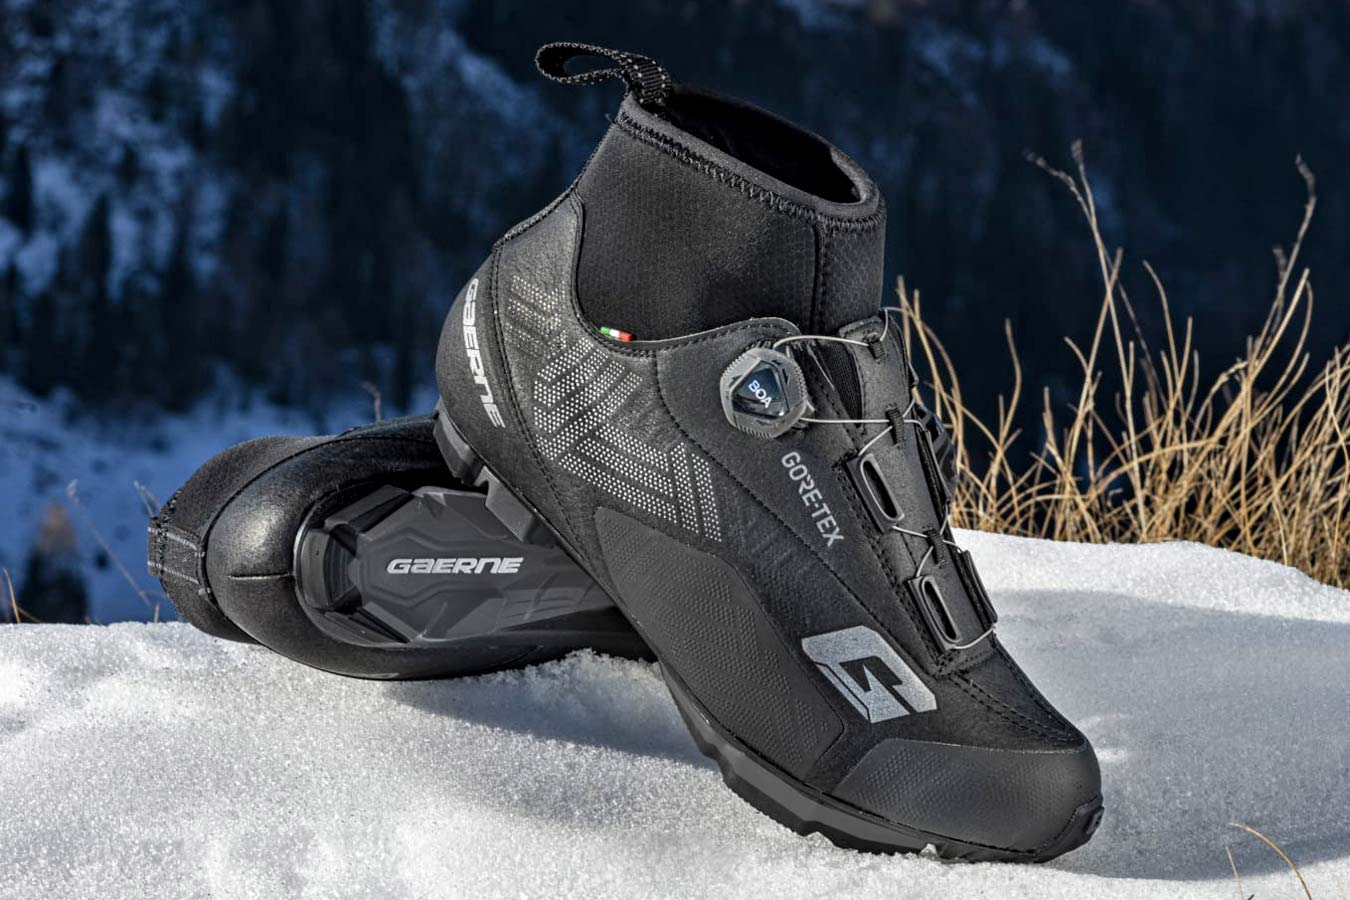 Gaerne G.Ice Storm GoreTex MTB cycling shoes in snow